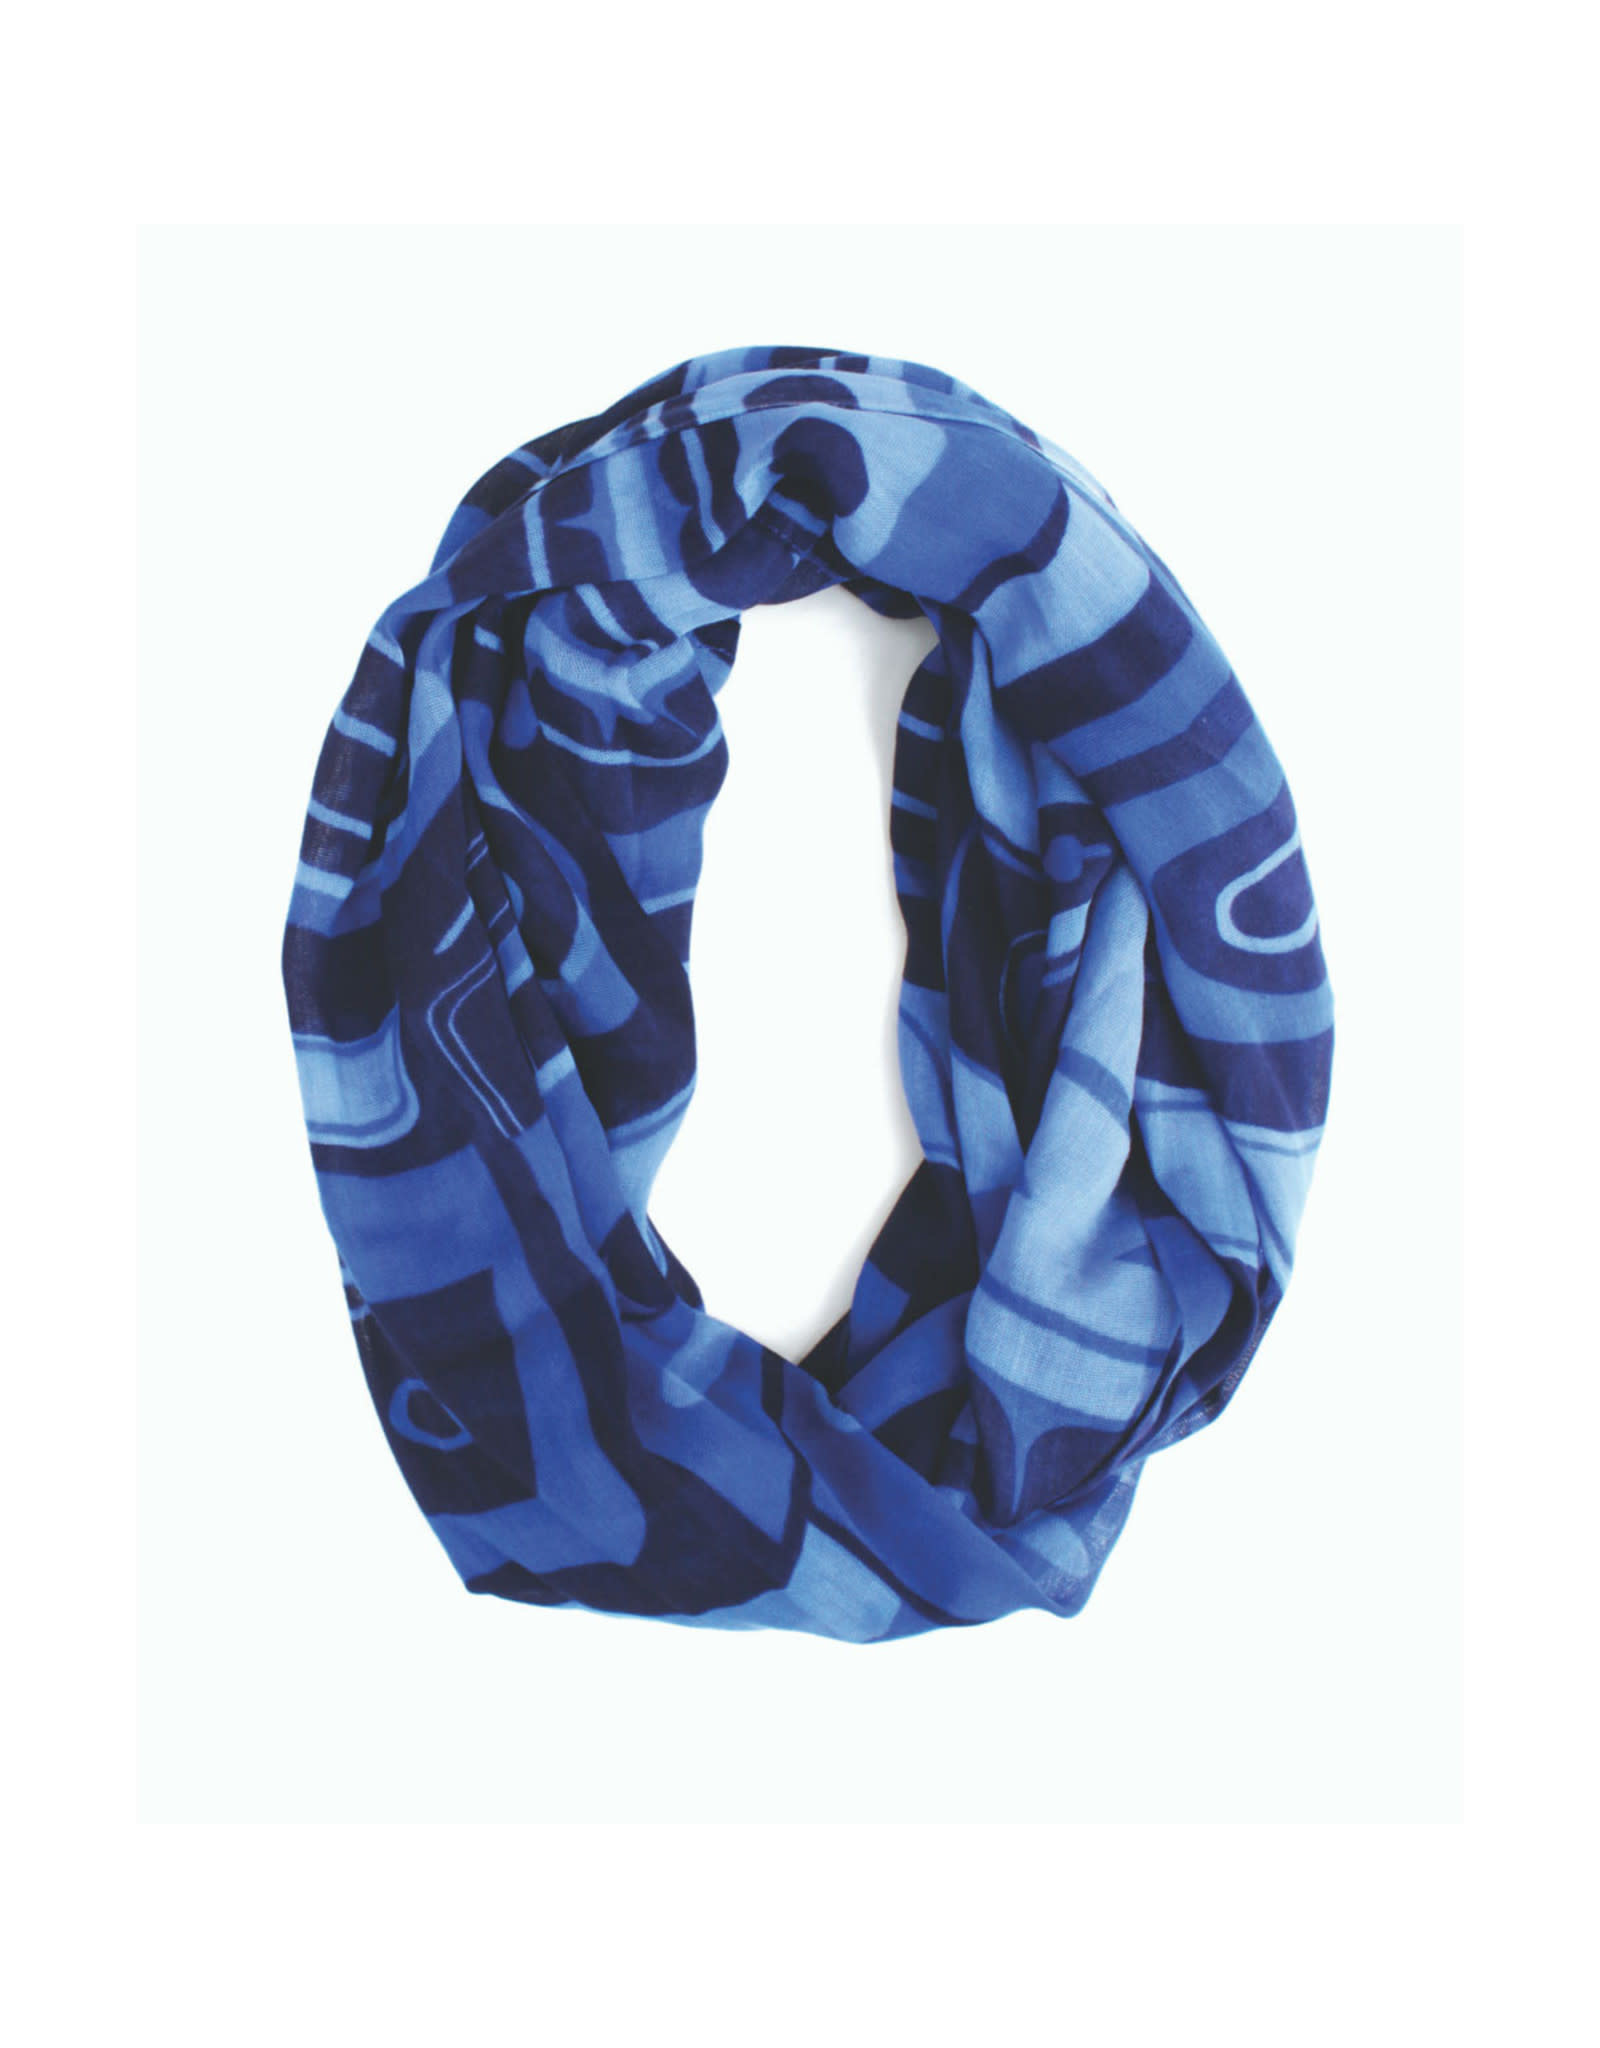 Circle Scarf - 'Inspiring The Future' by Roger Smith - BCSCARF13